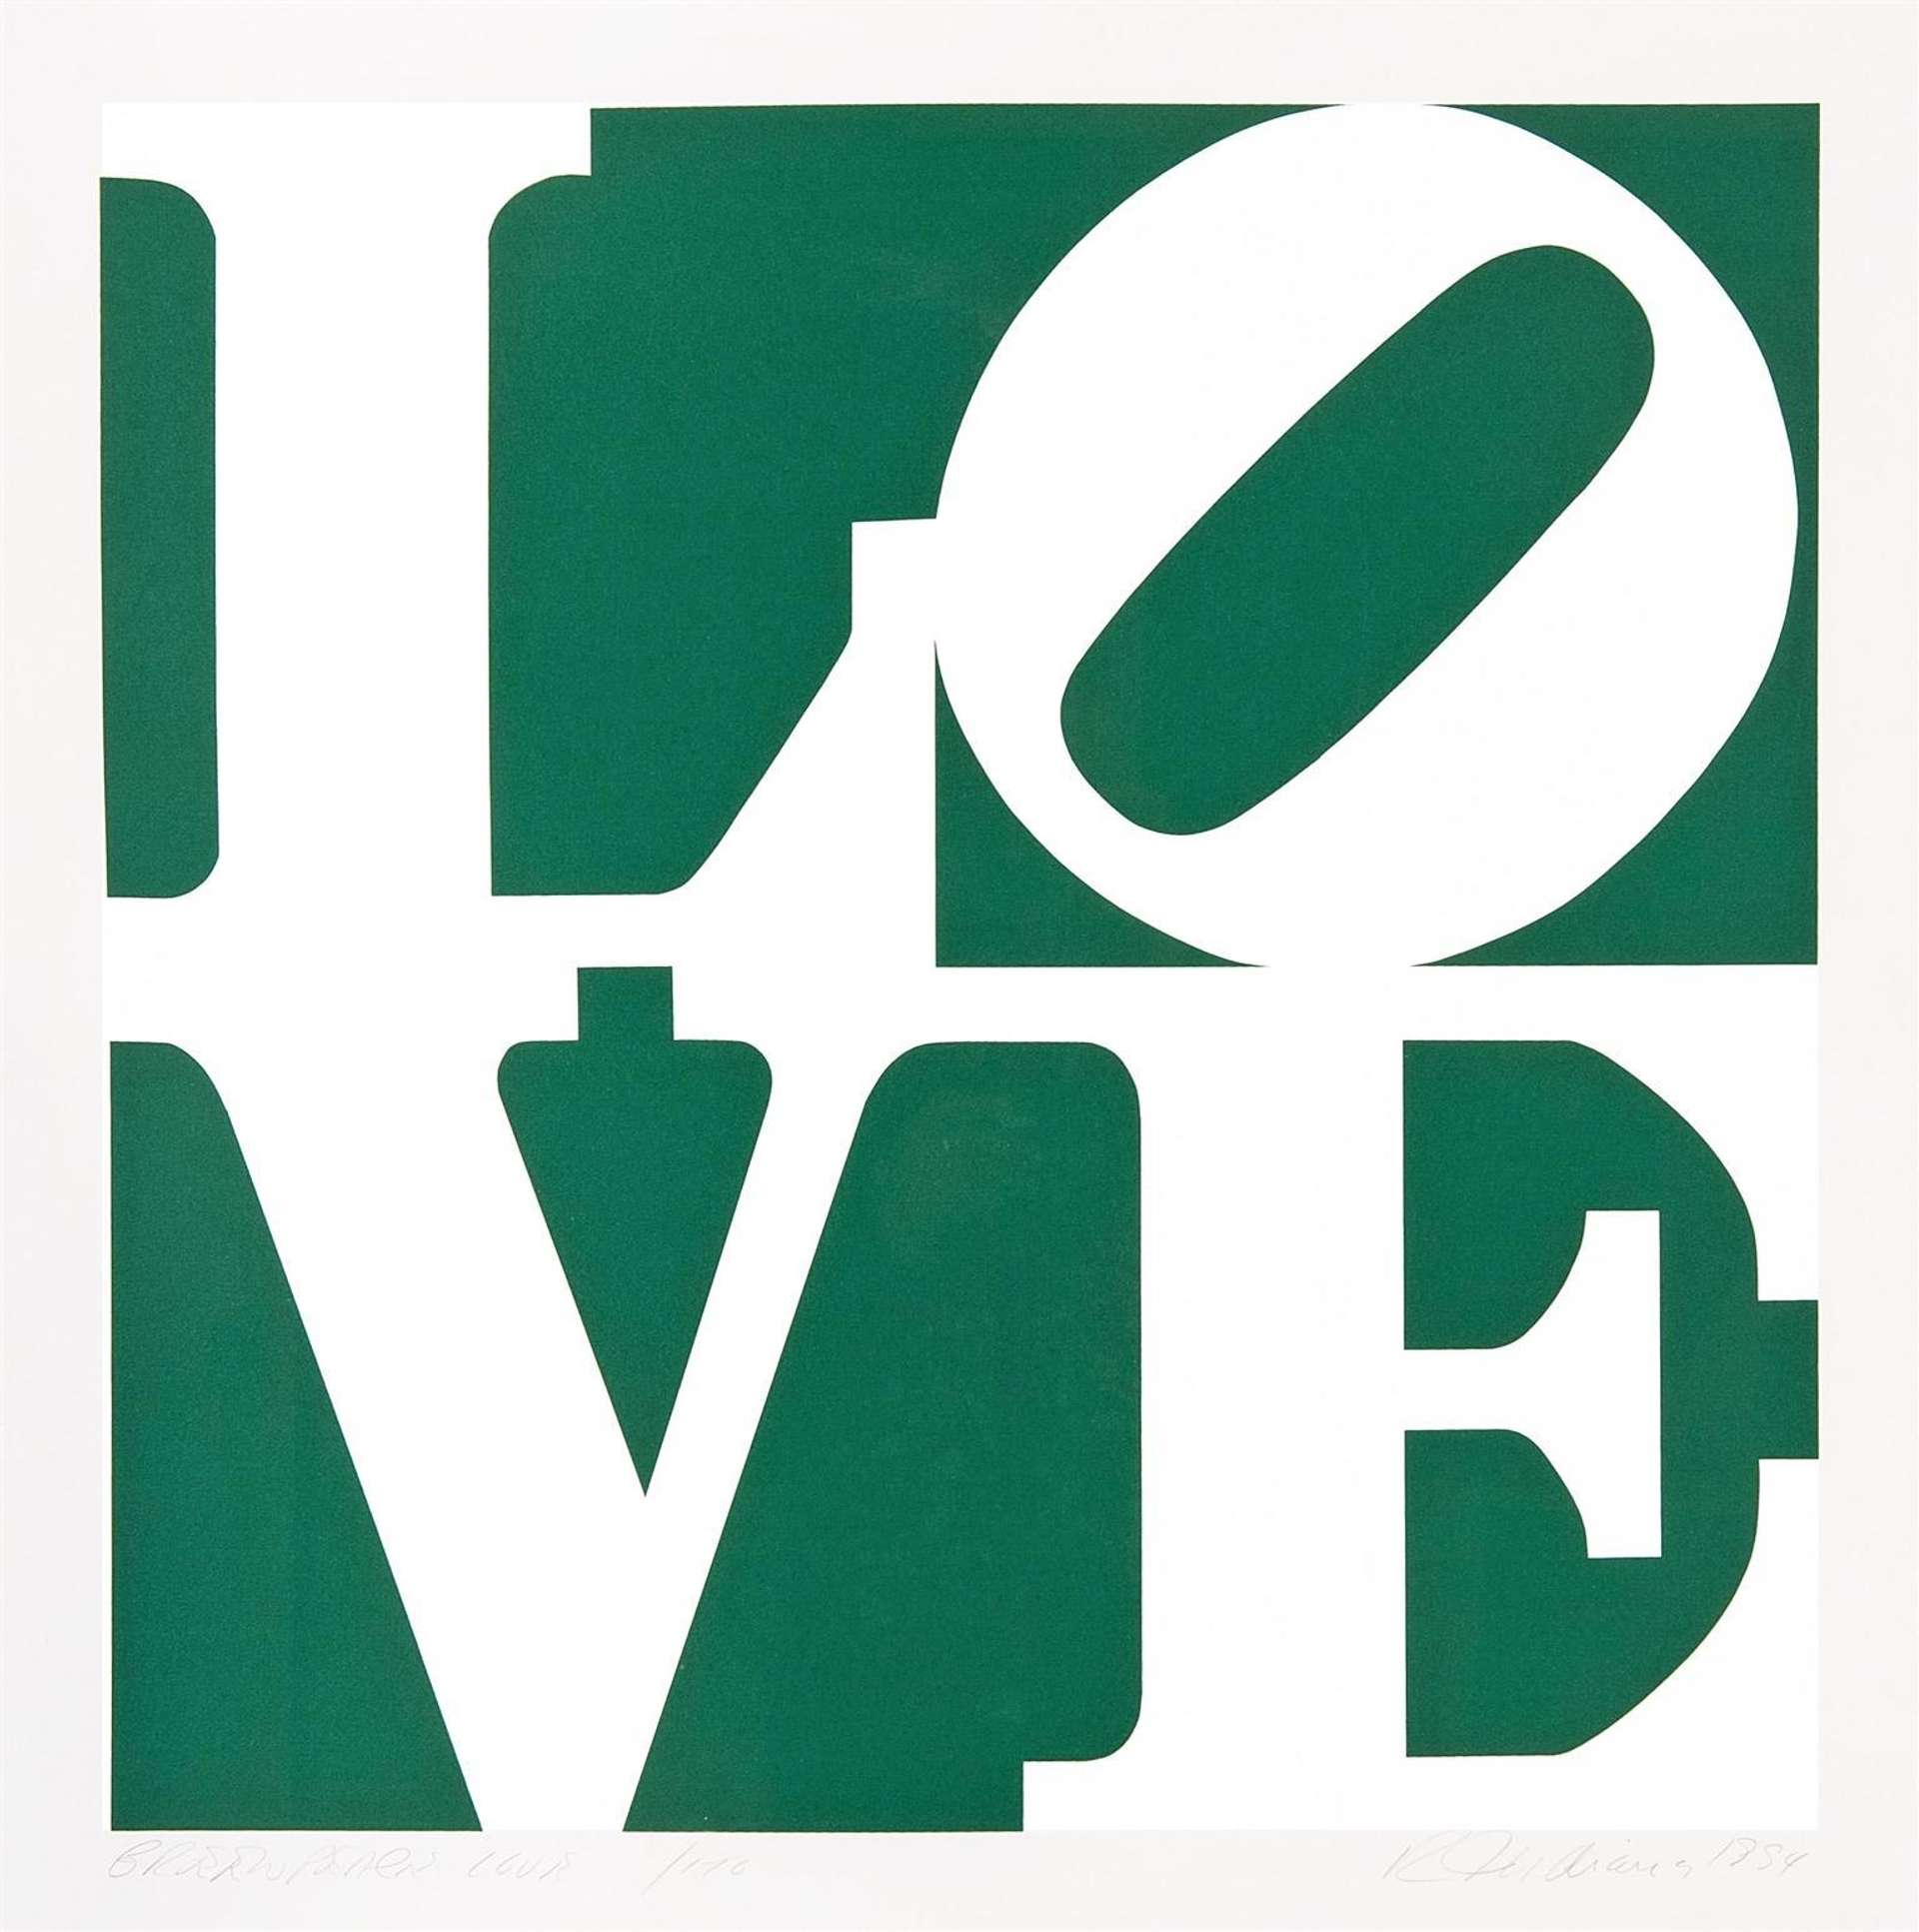 Greenpeace Love (white and green) - Signed Print by Robert Indiana 1994 - MyArtBroker